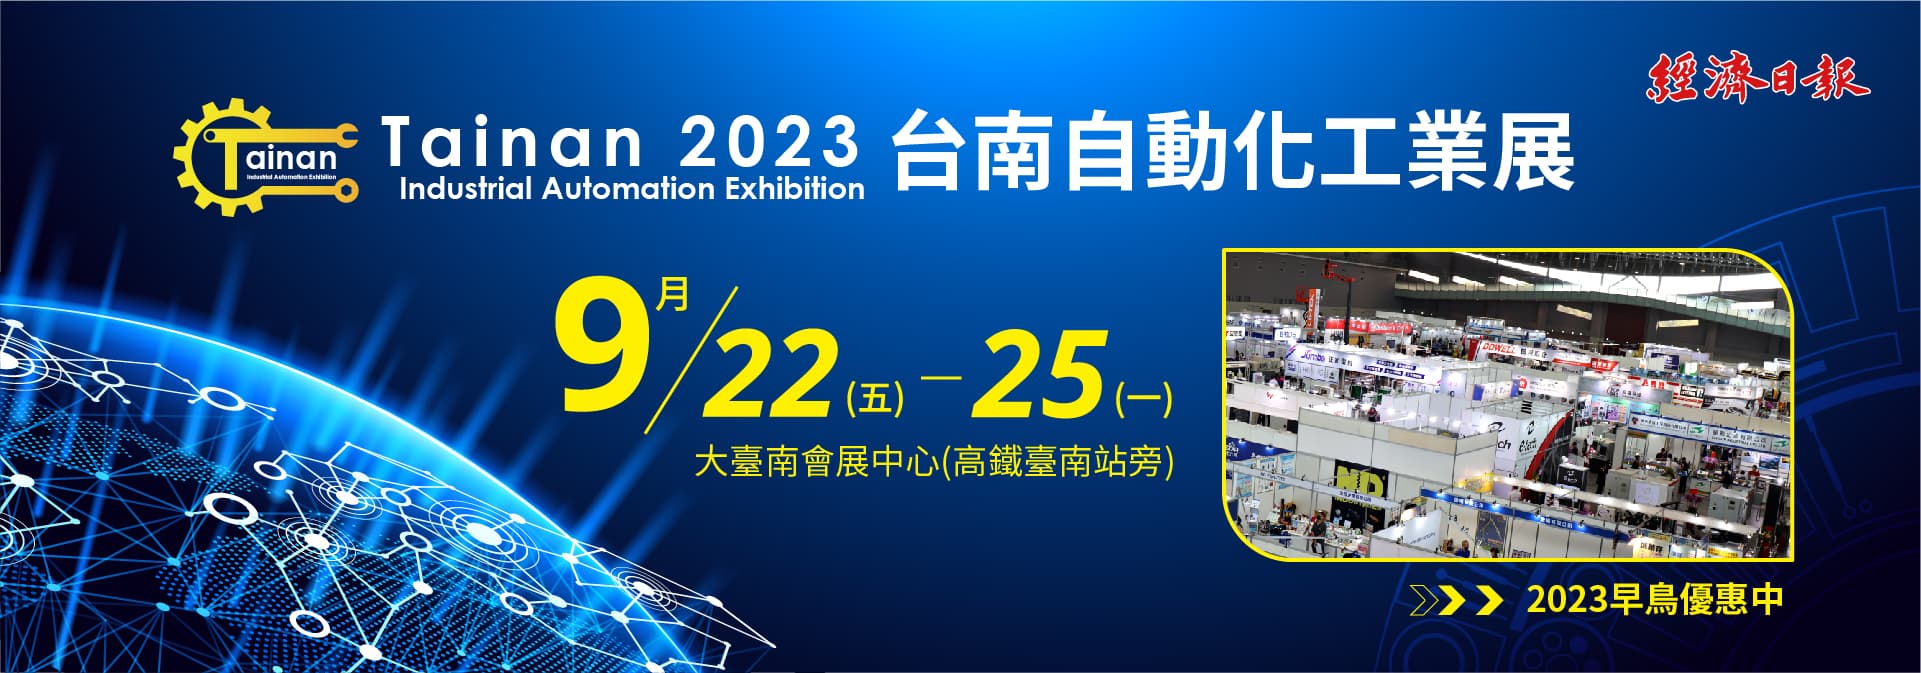 2023 CTMS / Tainan Automatic Machinery & Intelligent Manufacturing Show 